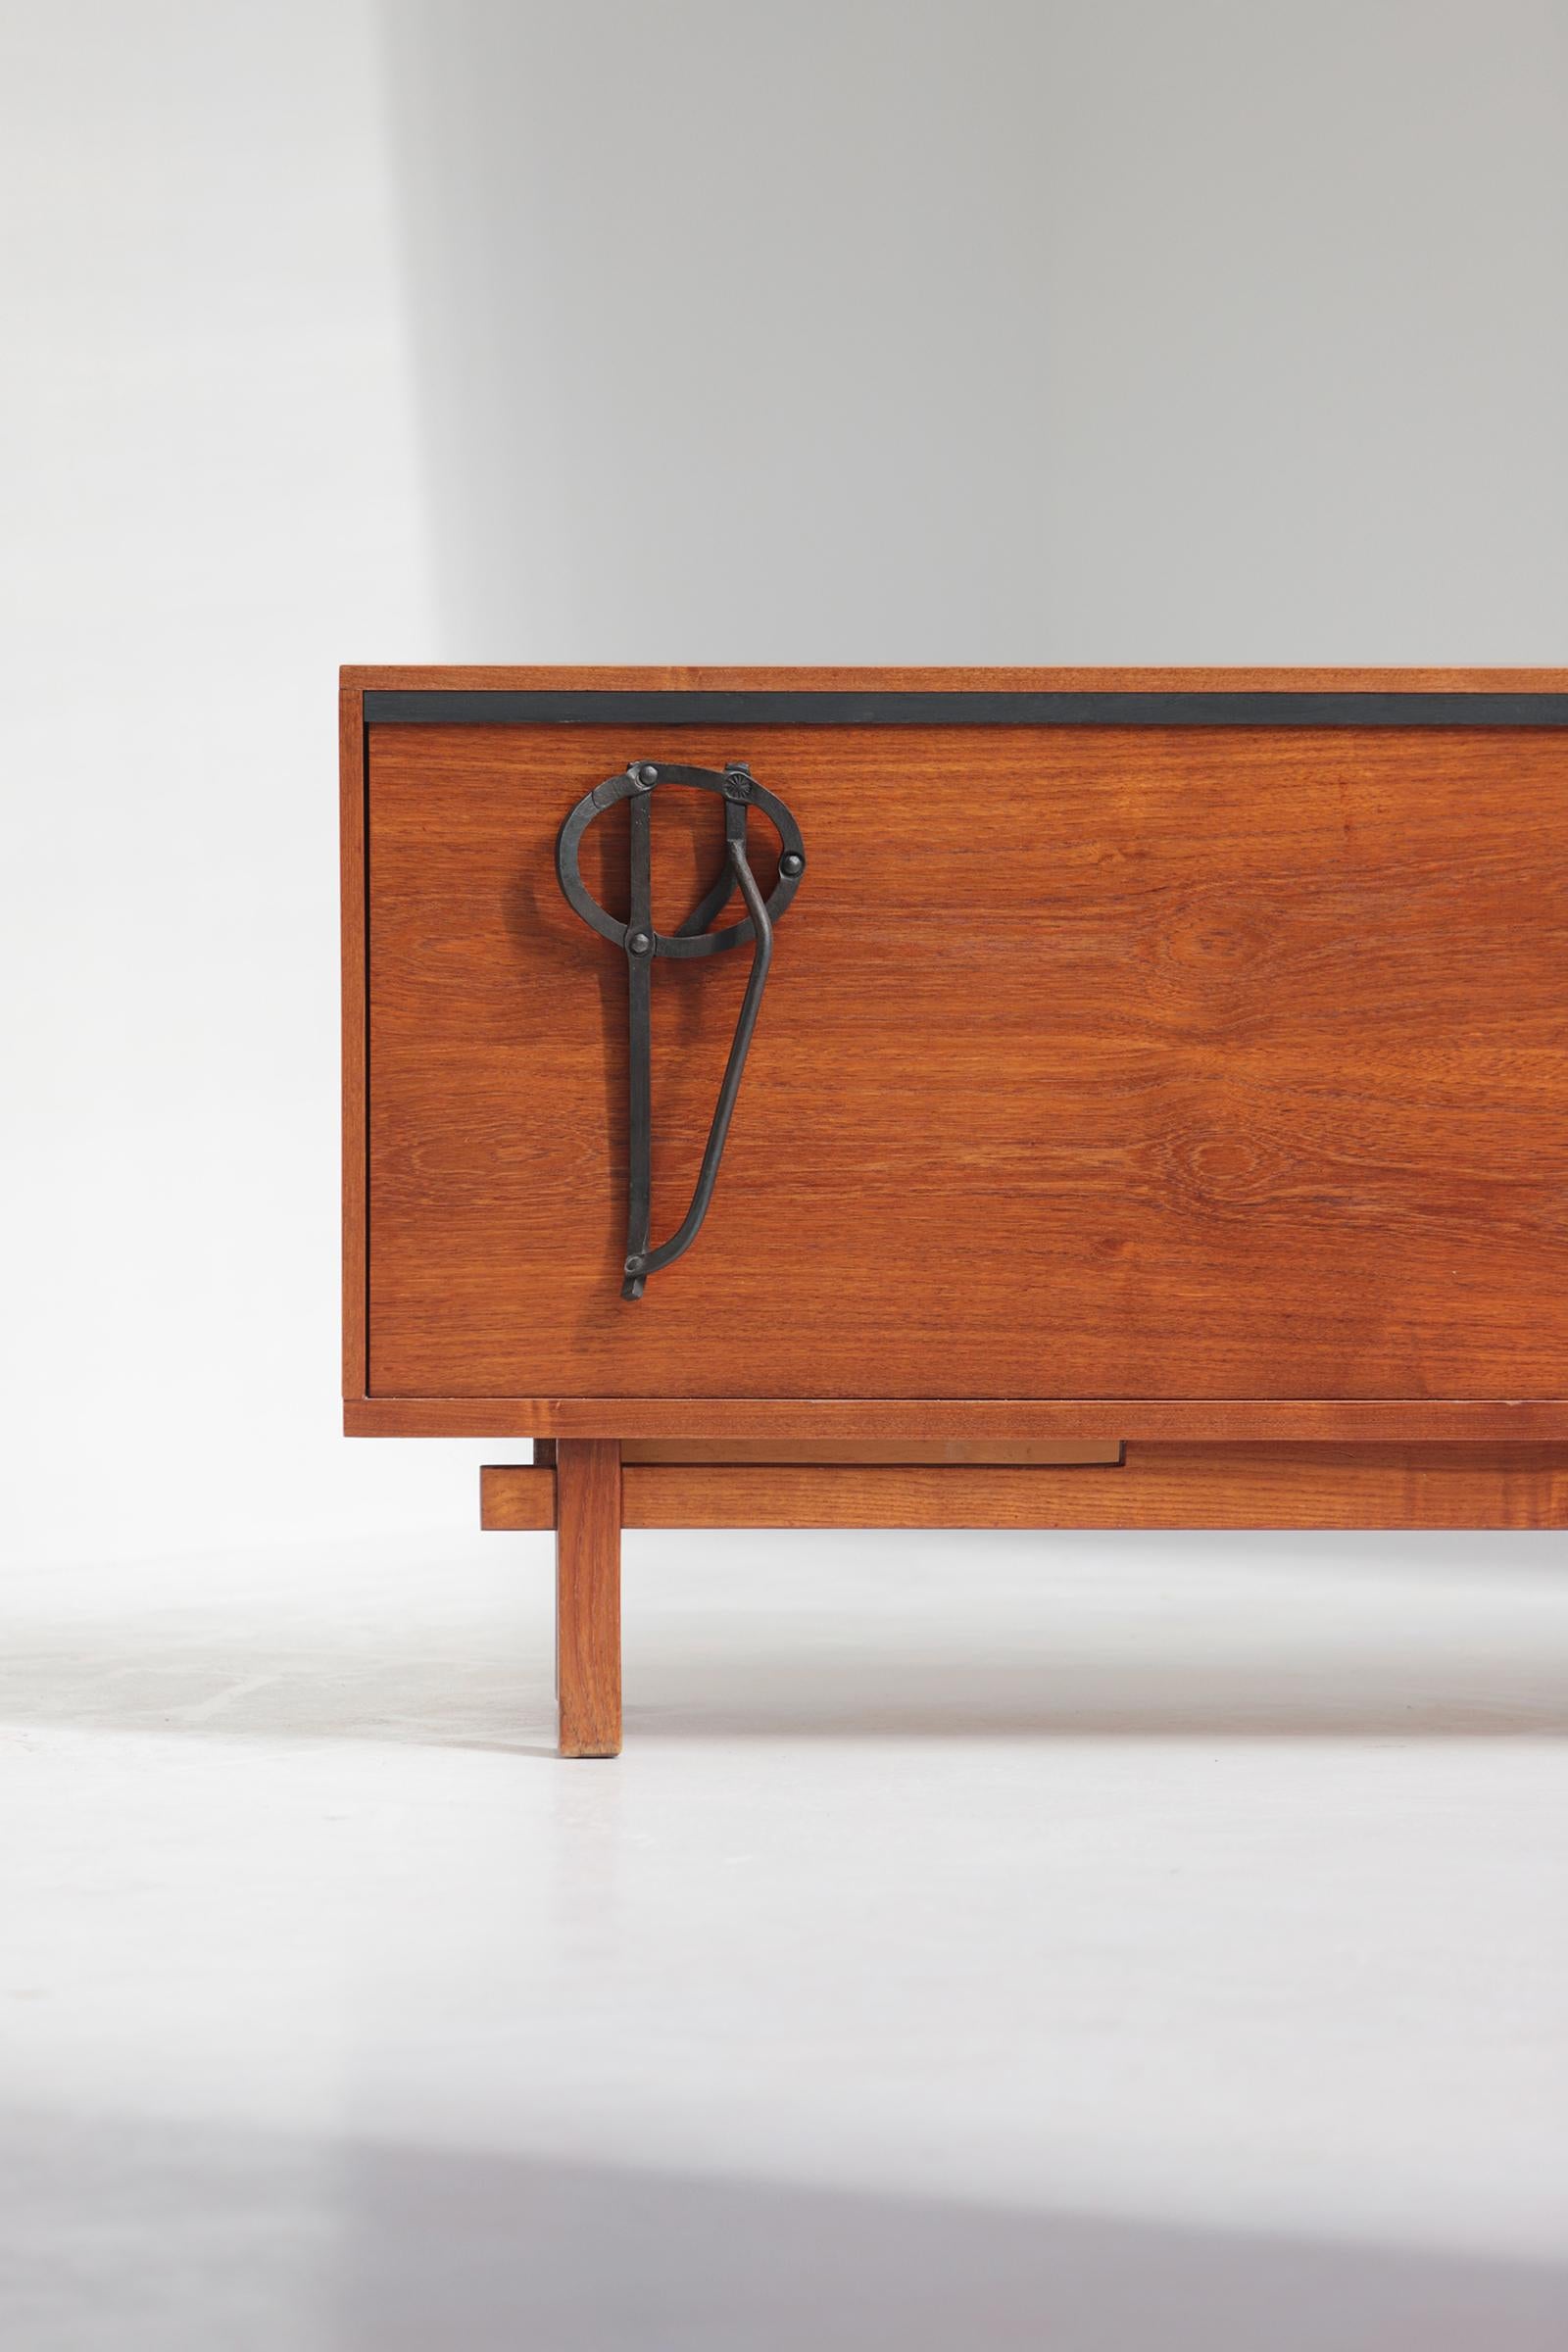 Belgian Midcentury wooden sideboard by J. Batenburg and E. Souply for MI Belgium 1960s.